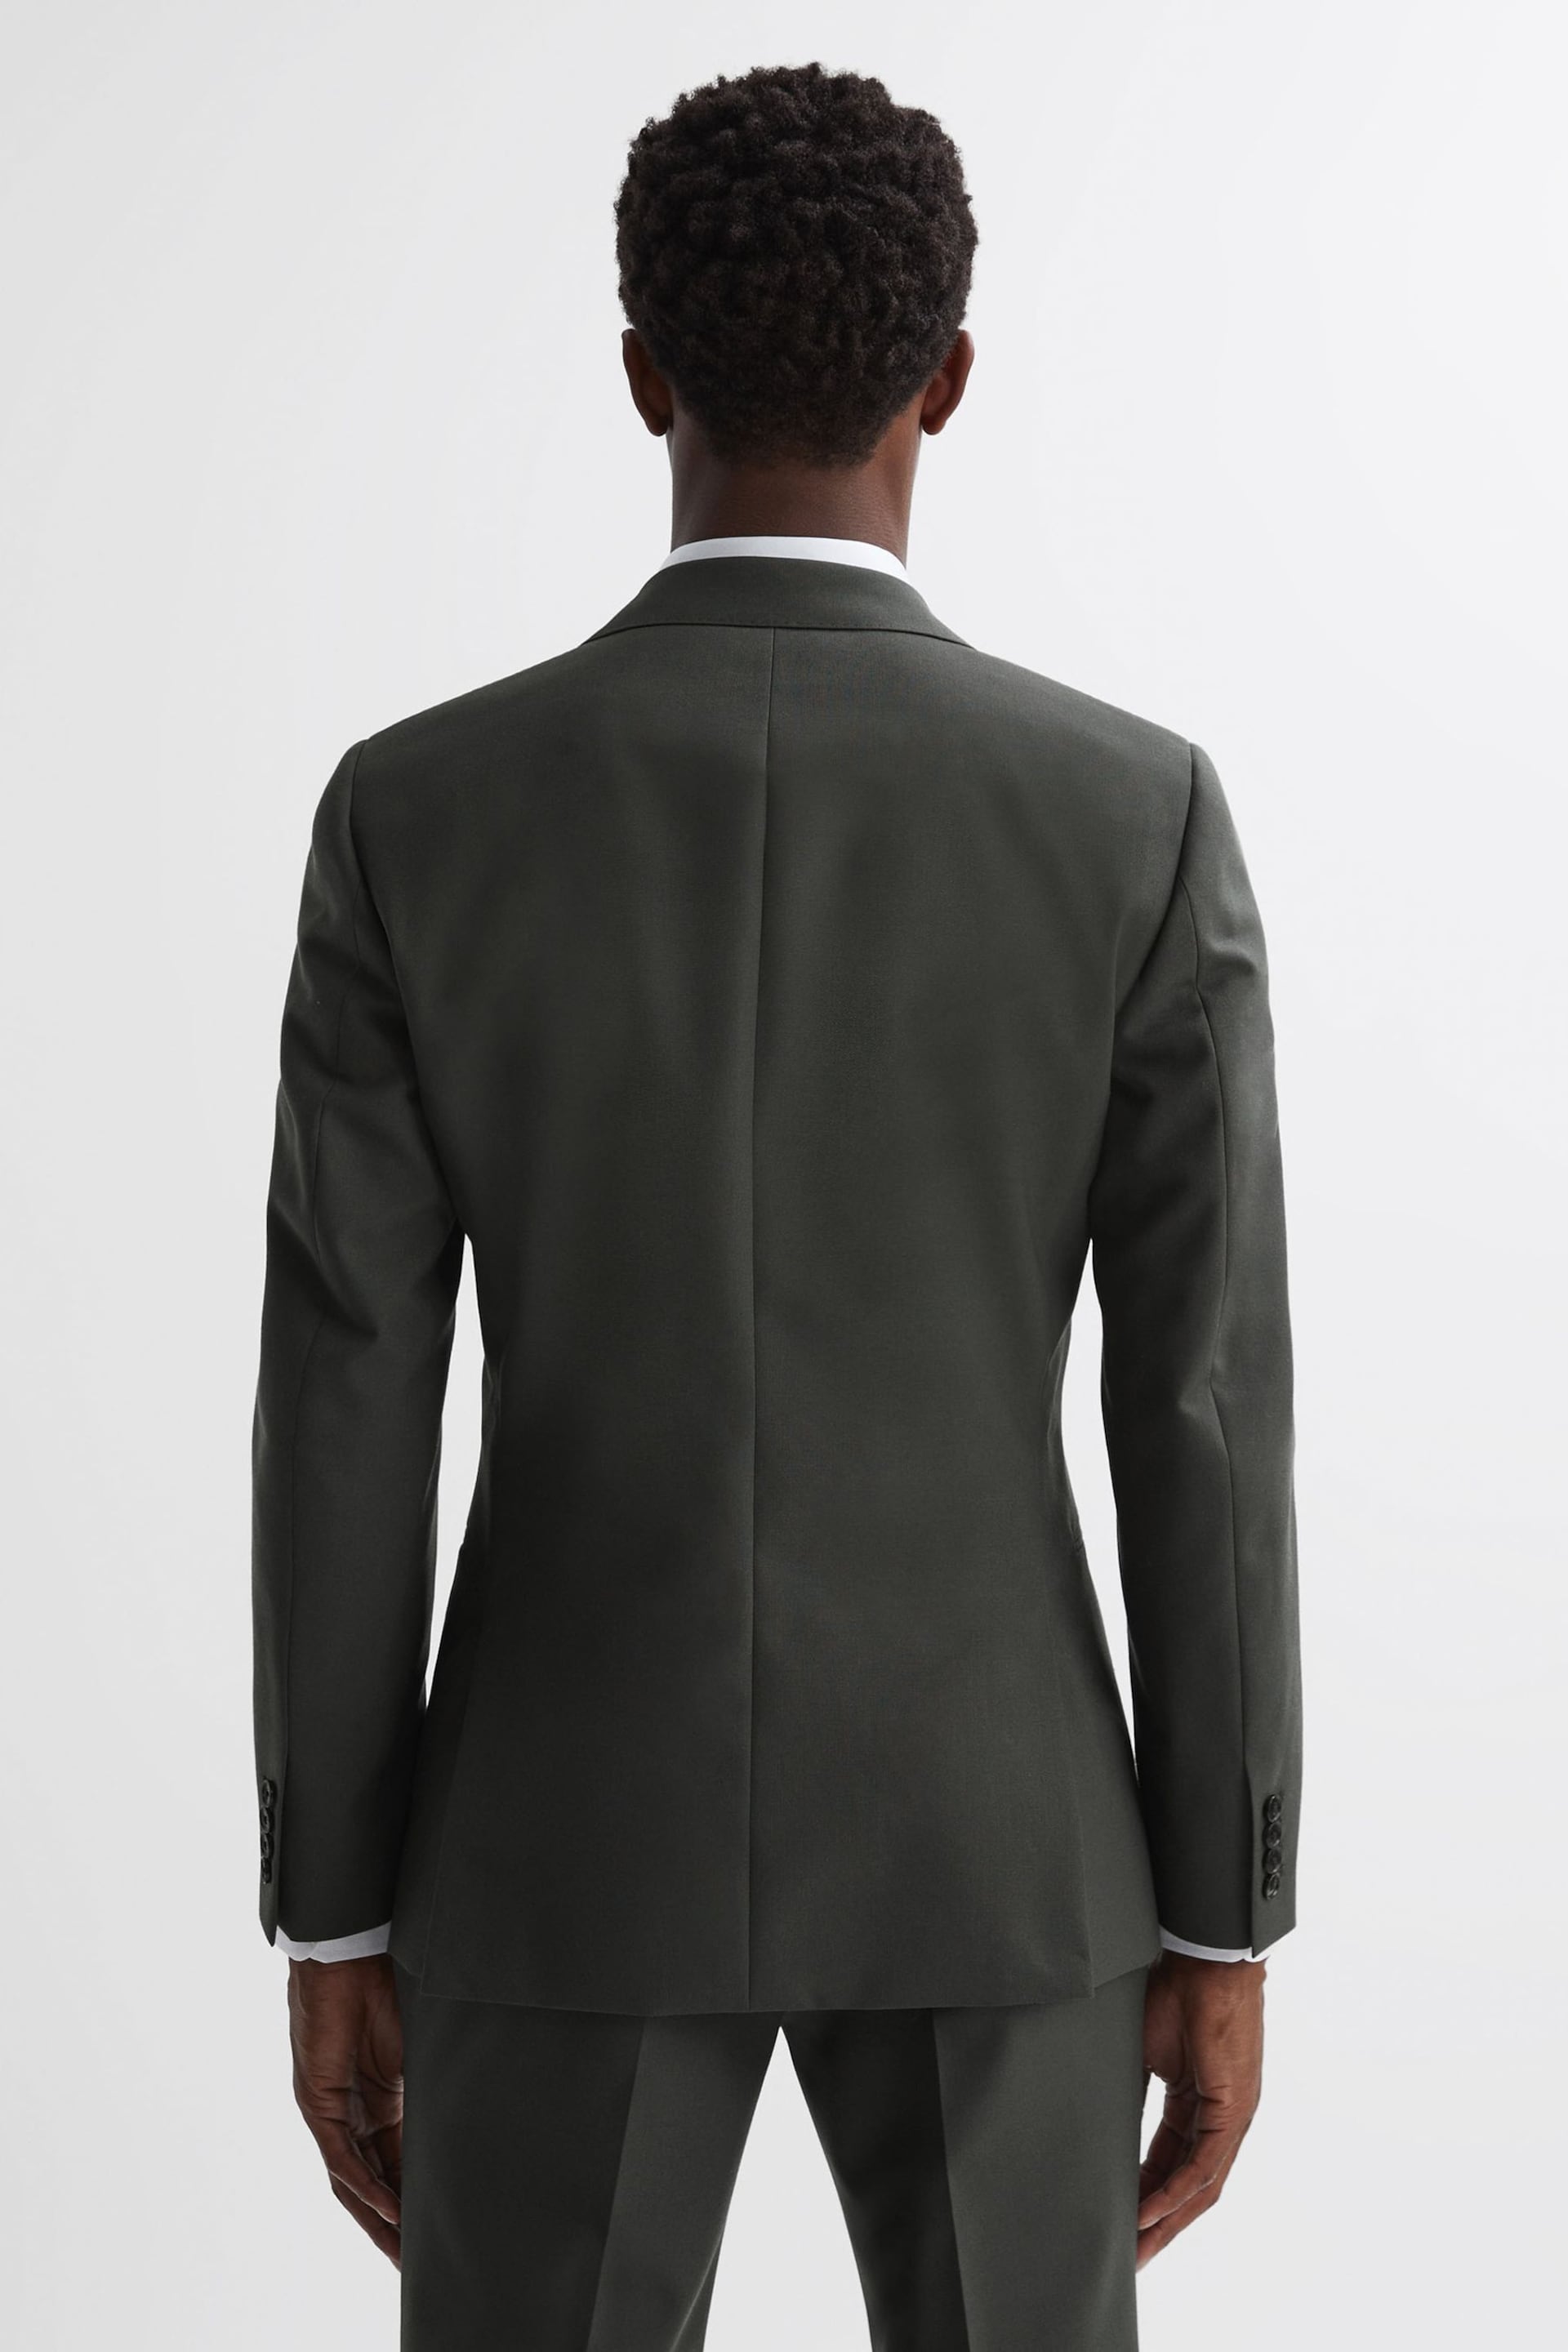 Reiss Forest Green Bold Slim Fit Wool Single Breasted Blazer - Image 4 of 6